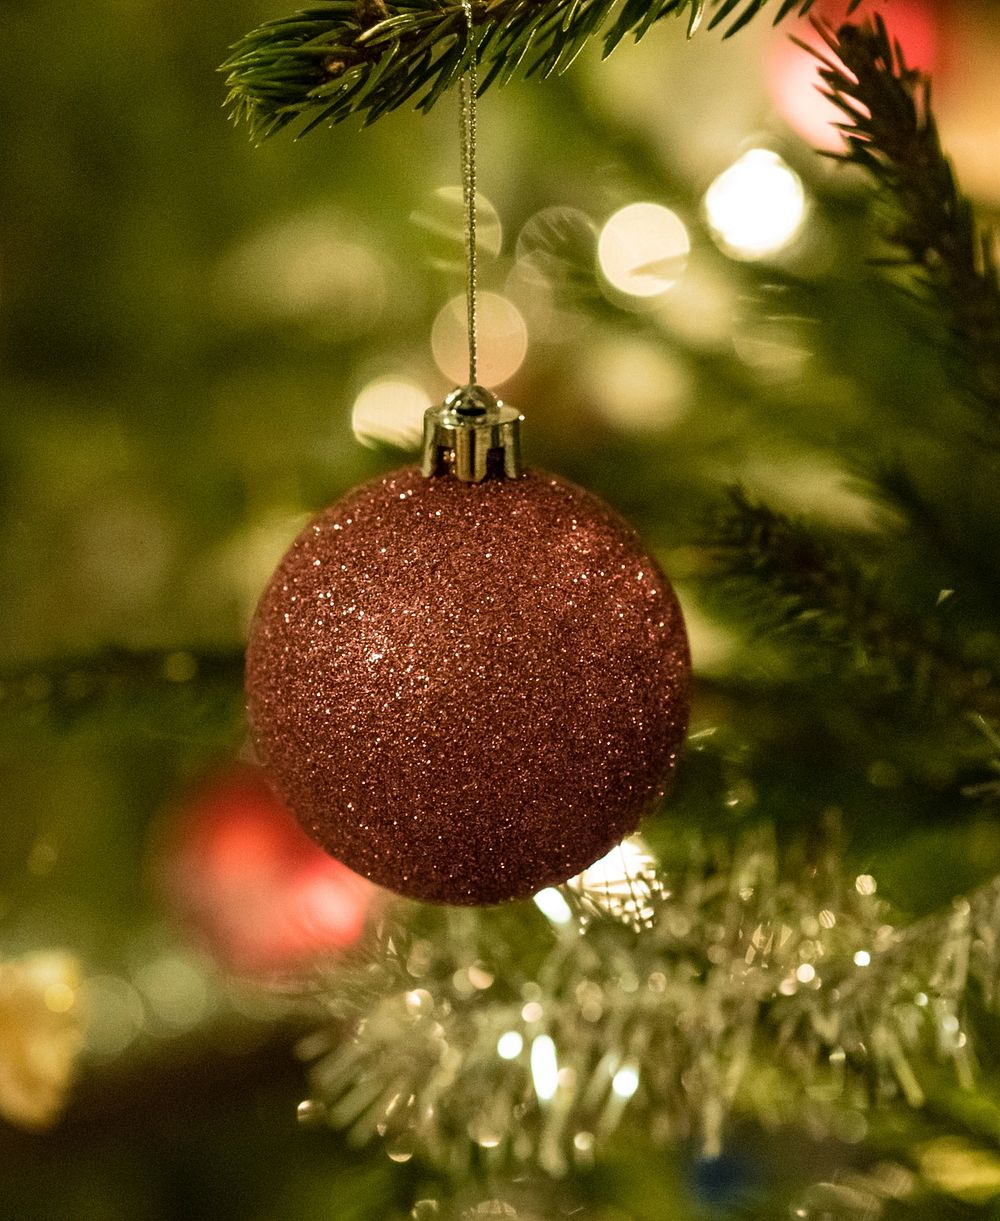 One Ball of Yule. Original public domain image from Flickr